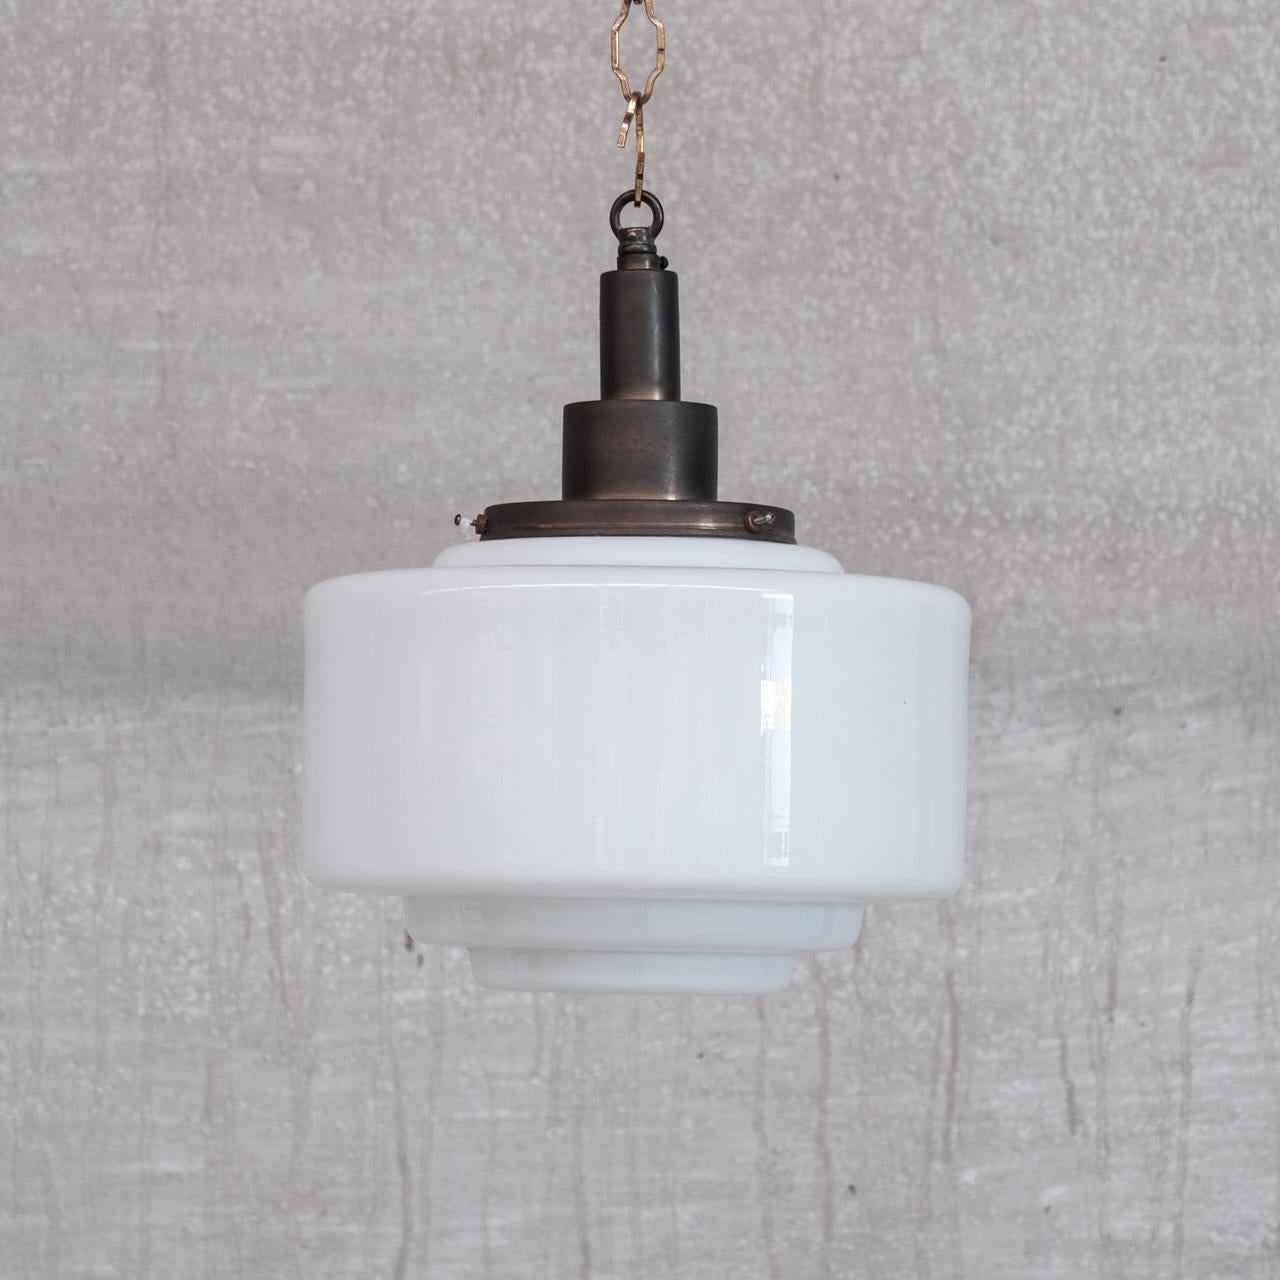 An opaline glass pendant light. 

France, c1950s. 

Naturally patinated glass gallery. 

No original chain or rose was retained but can be soruced easily online to taste. 

Re-wired and PAT tested since. 

Location: Belgium Gallery.